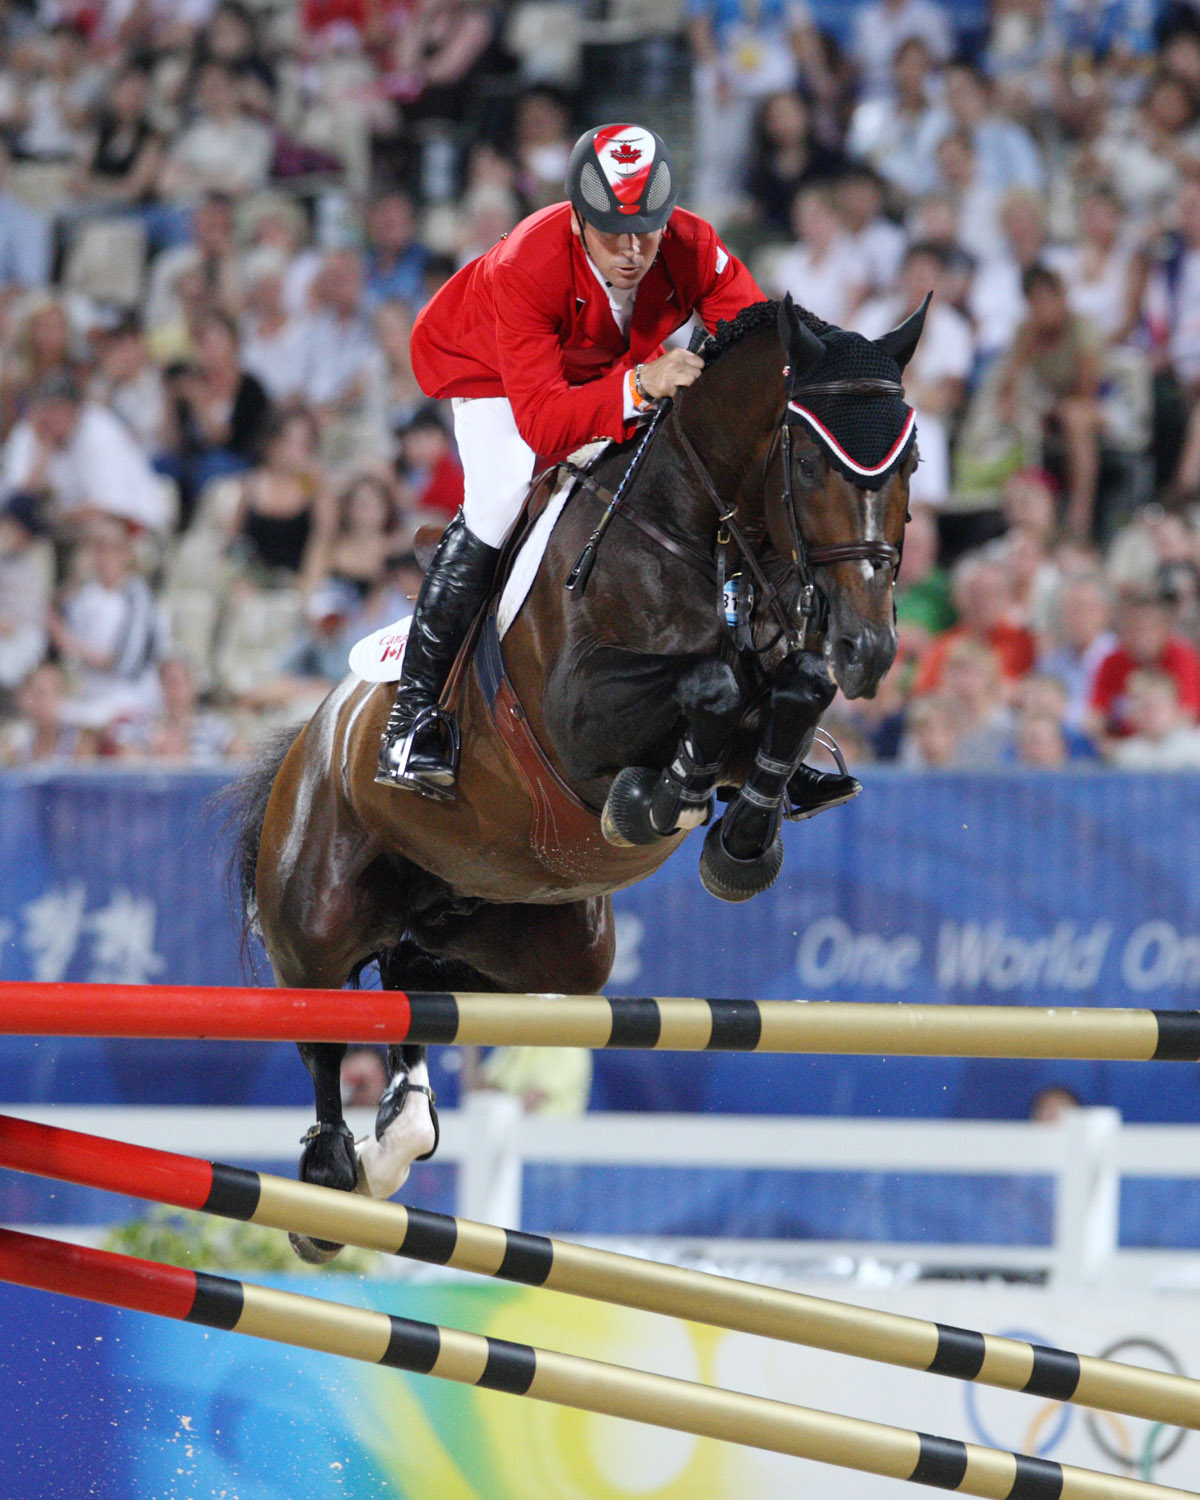 Canadian Show Jumping Team Tied For Fourth At 2008 Olympic